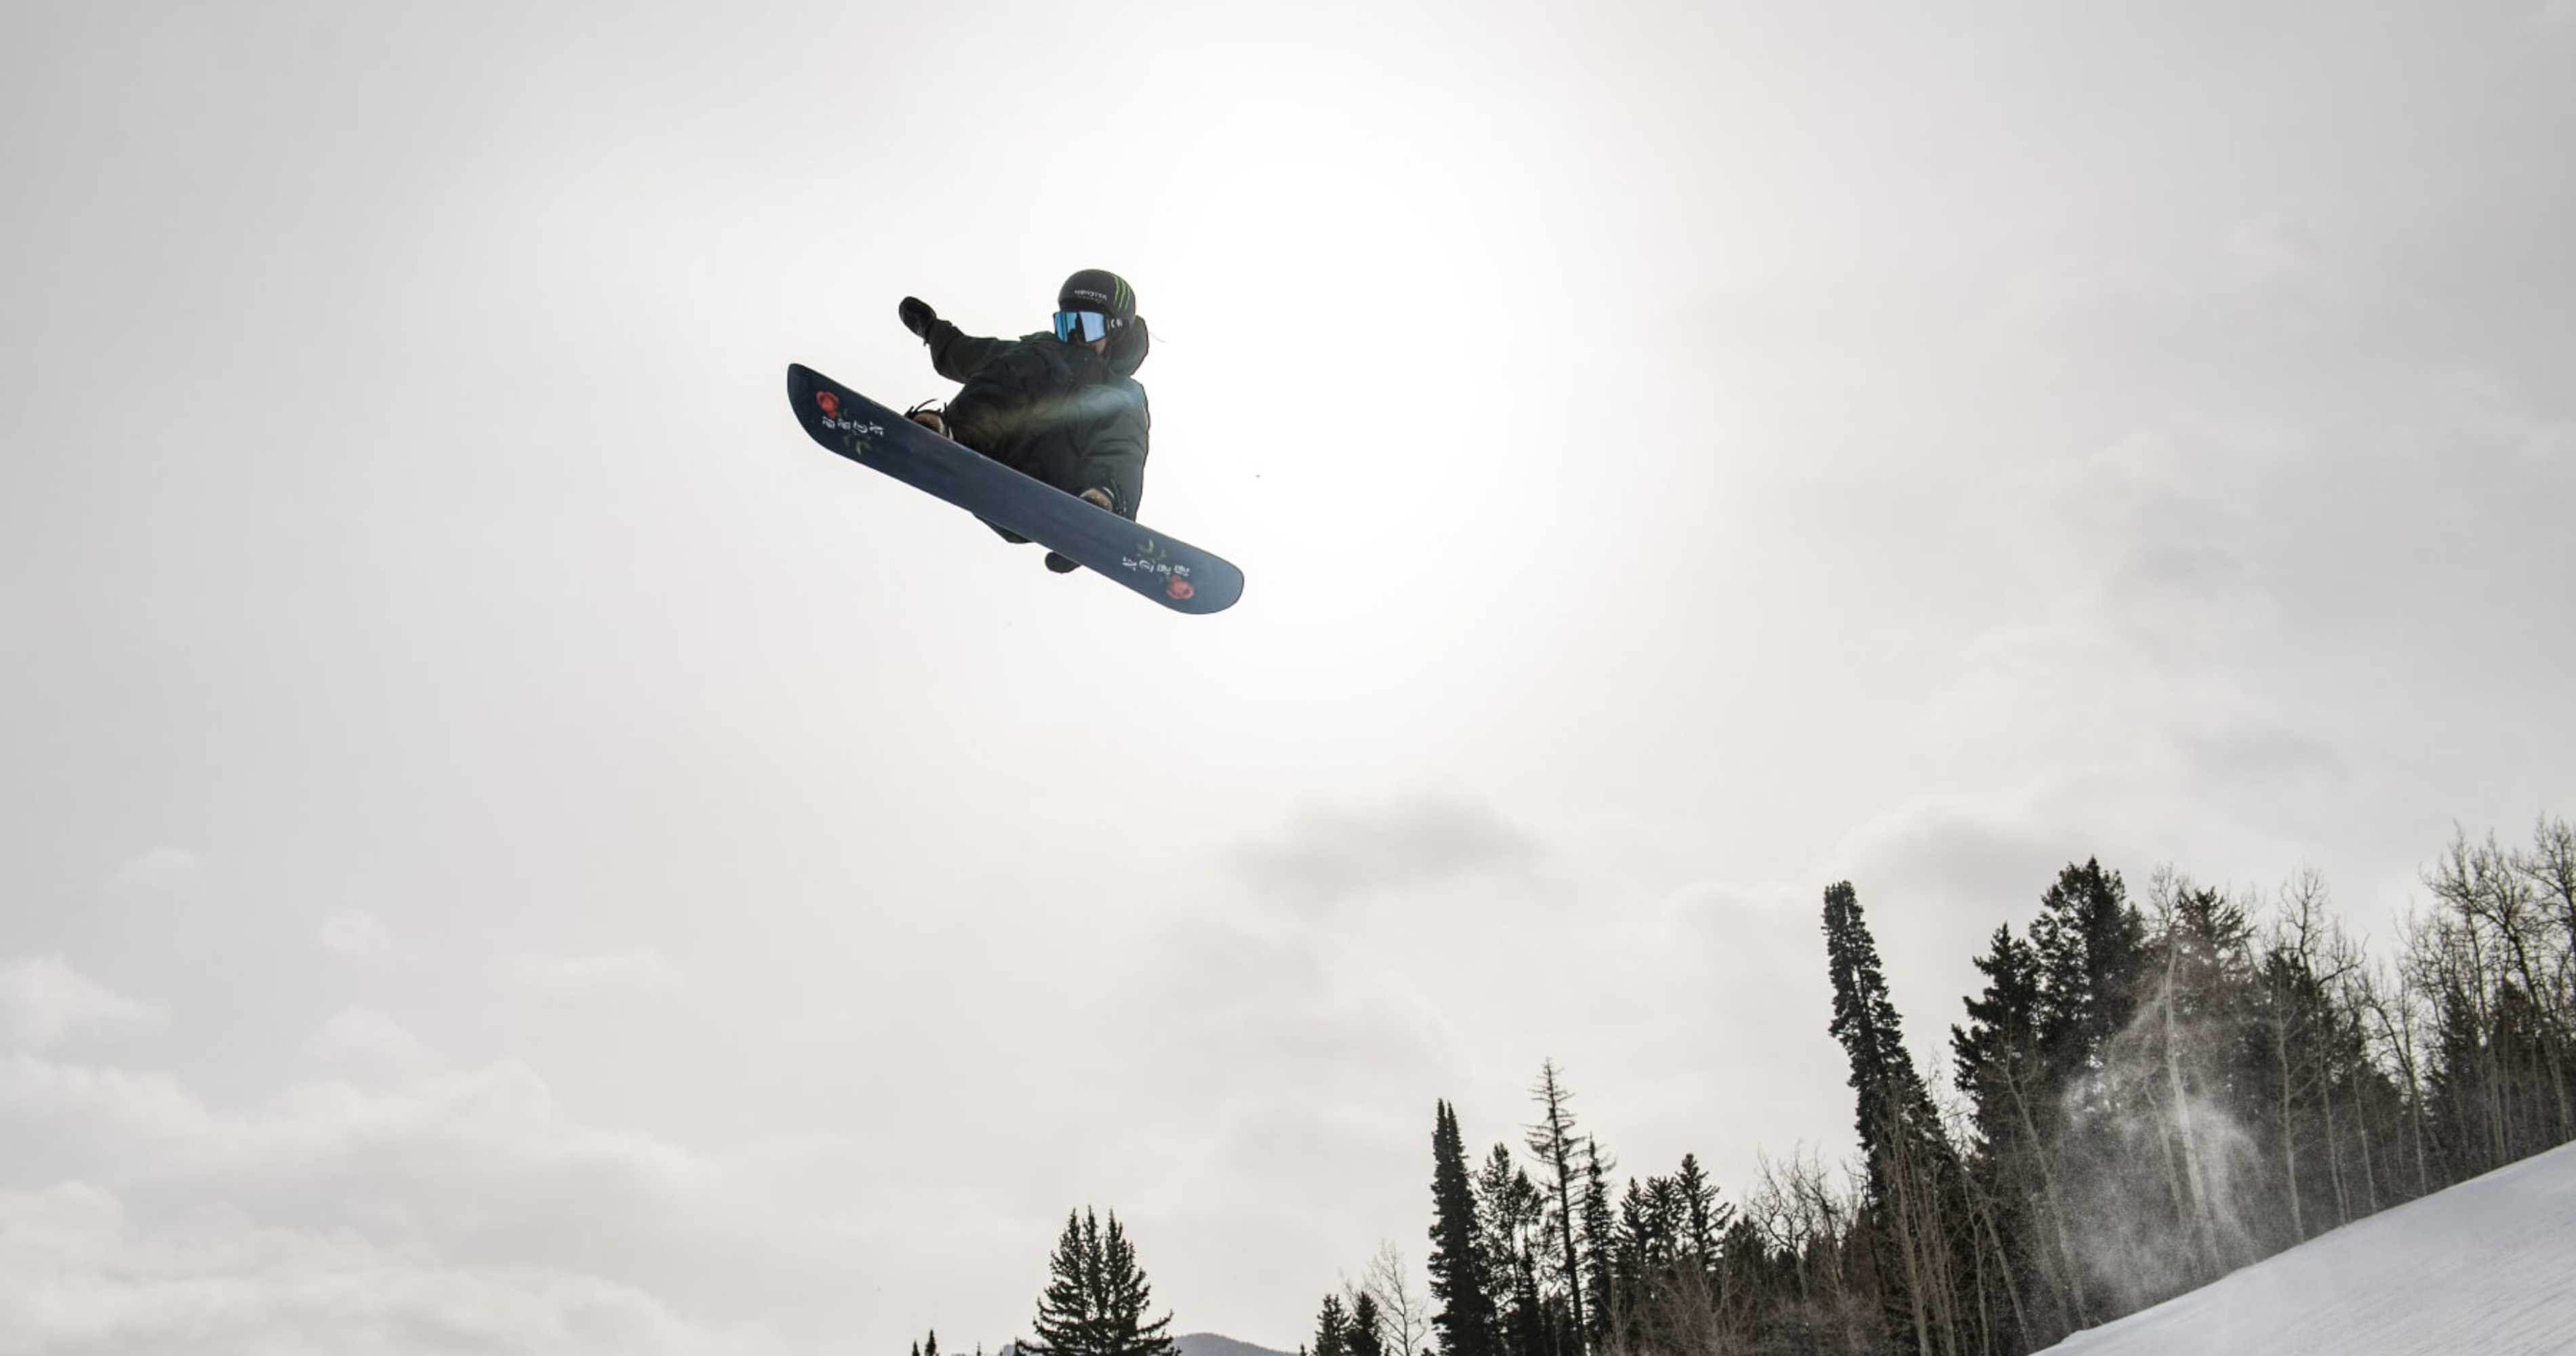 Winter X Games 2023 Full Results, Medal Winners and Best Trick Highlights News, Scores, Highlights, Stats, and Rumors Bleacher Report